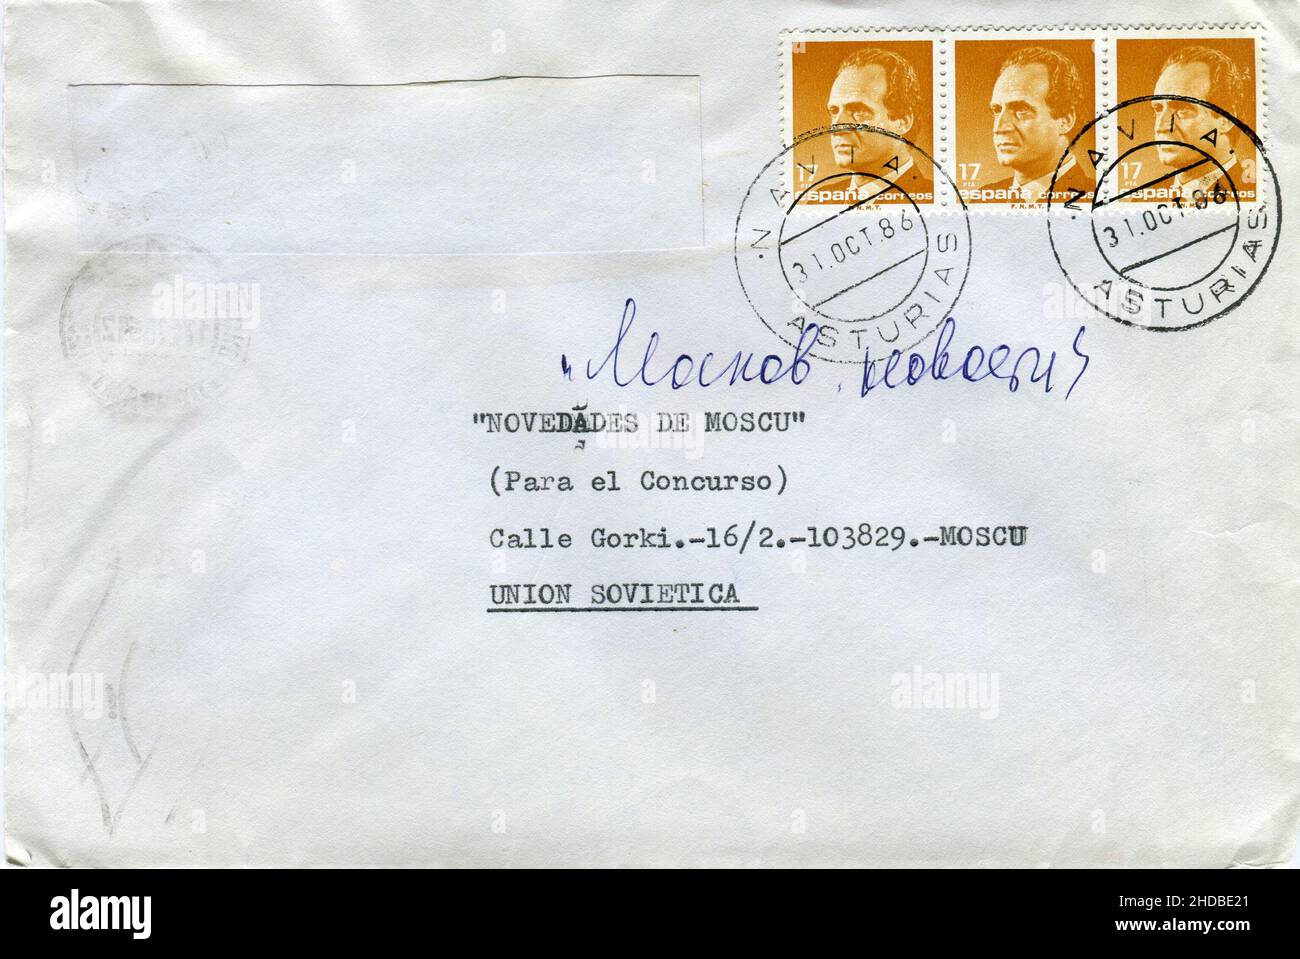 Old envelope which was dispatched from Spain to USSR, 31 OCTOBRE 1986. Stock Photo